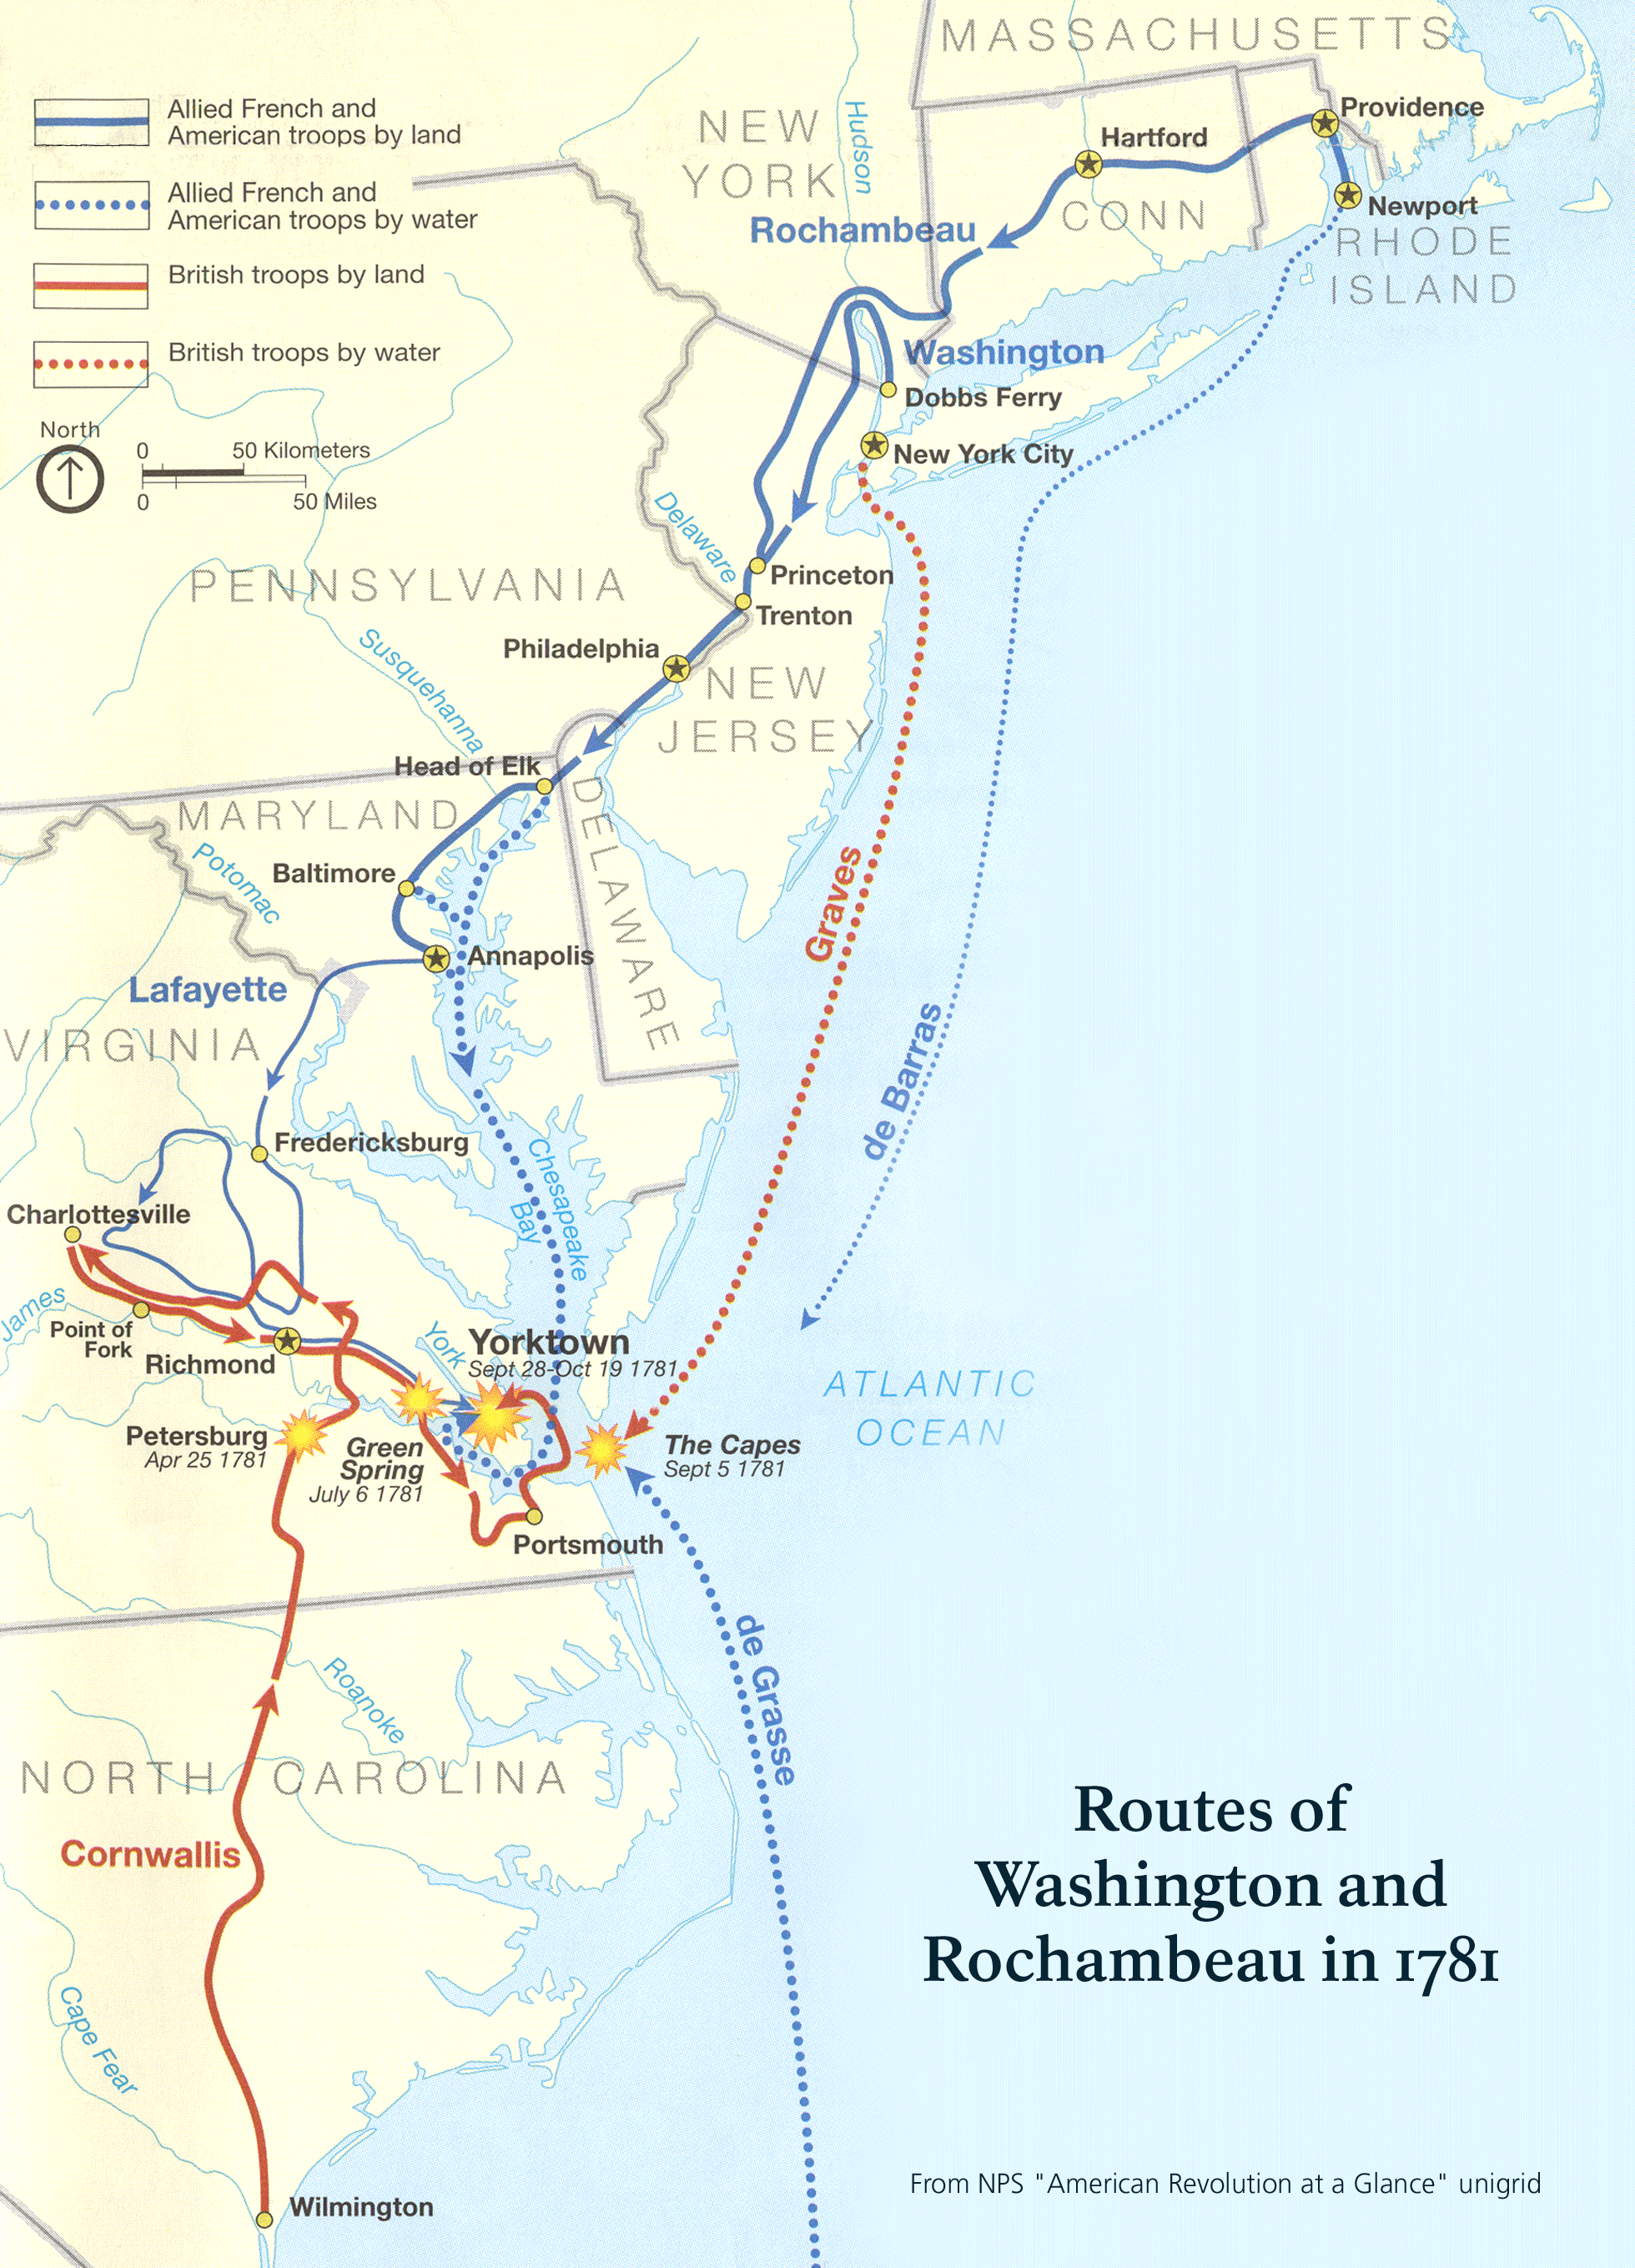 Official National Park Service map of the Washington-Rochambeau Revolutionary Route 